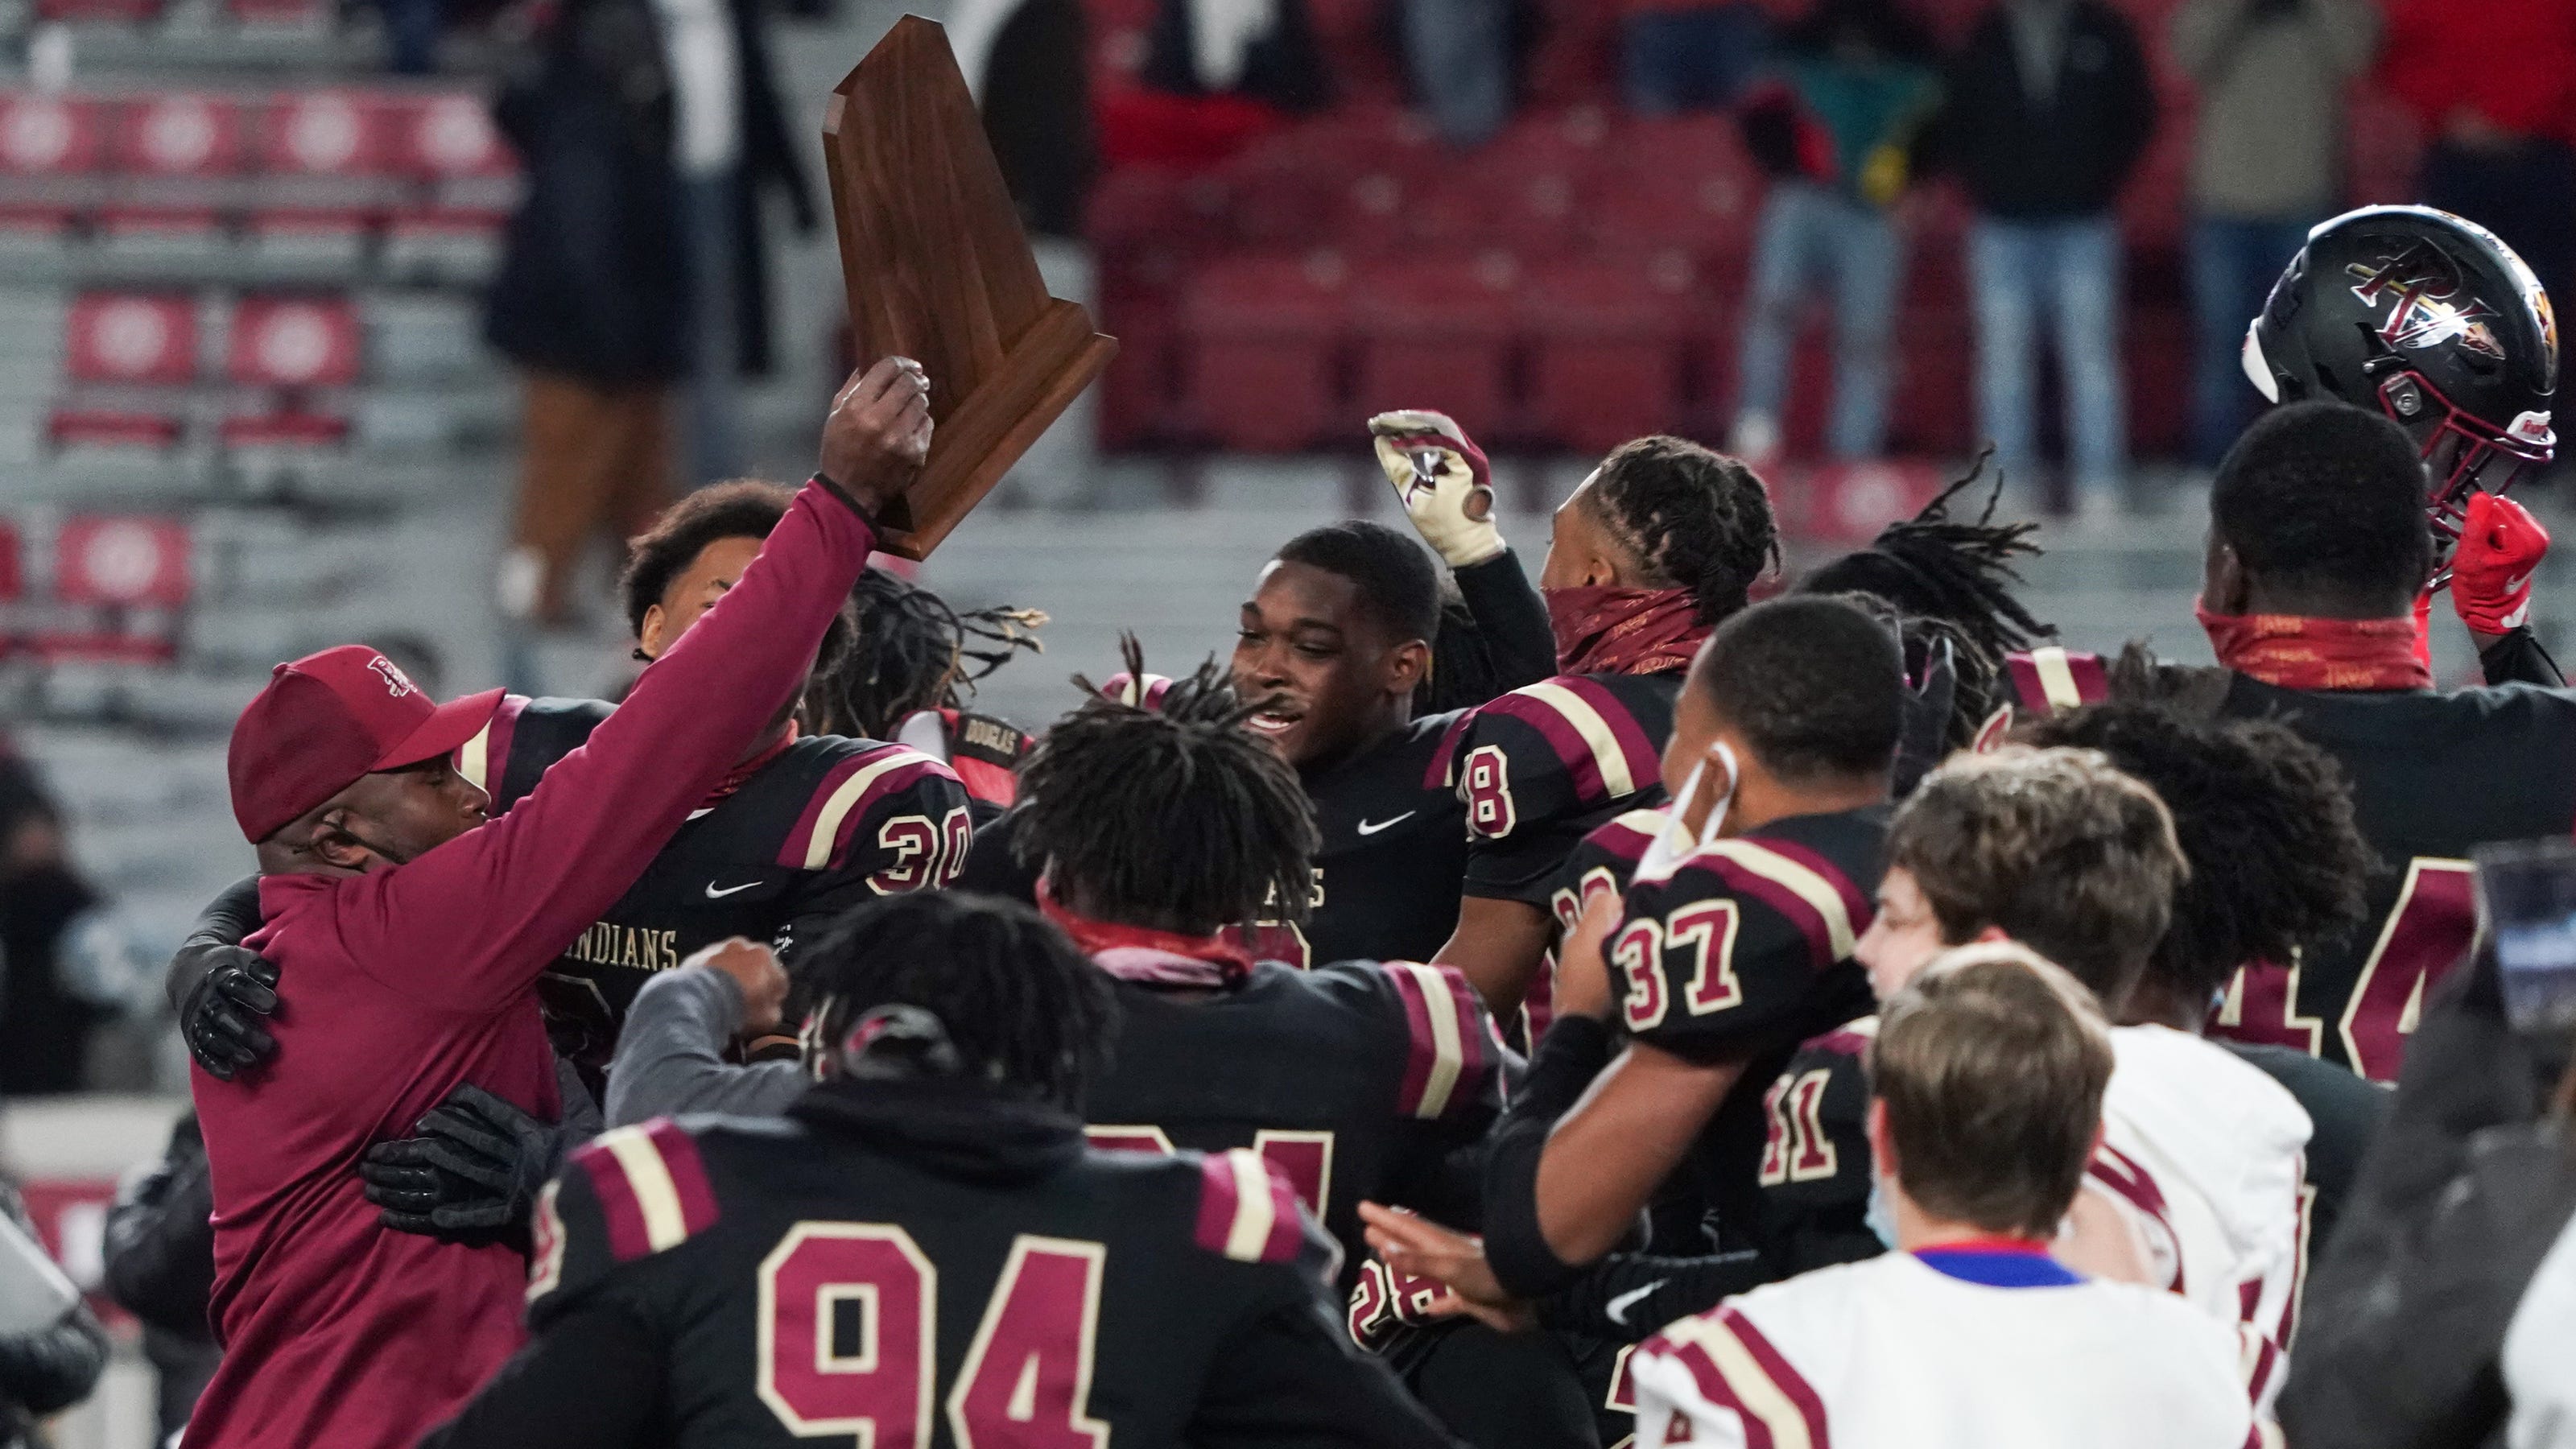 How to buy tickets to the AHSAA Super 7 football championships